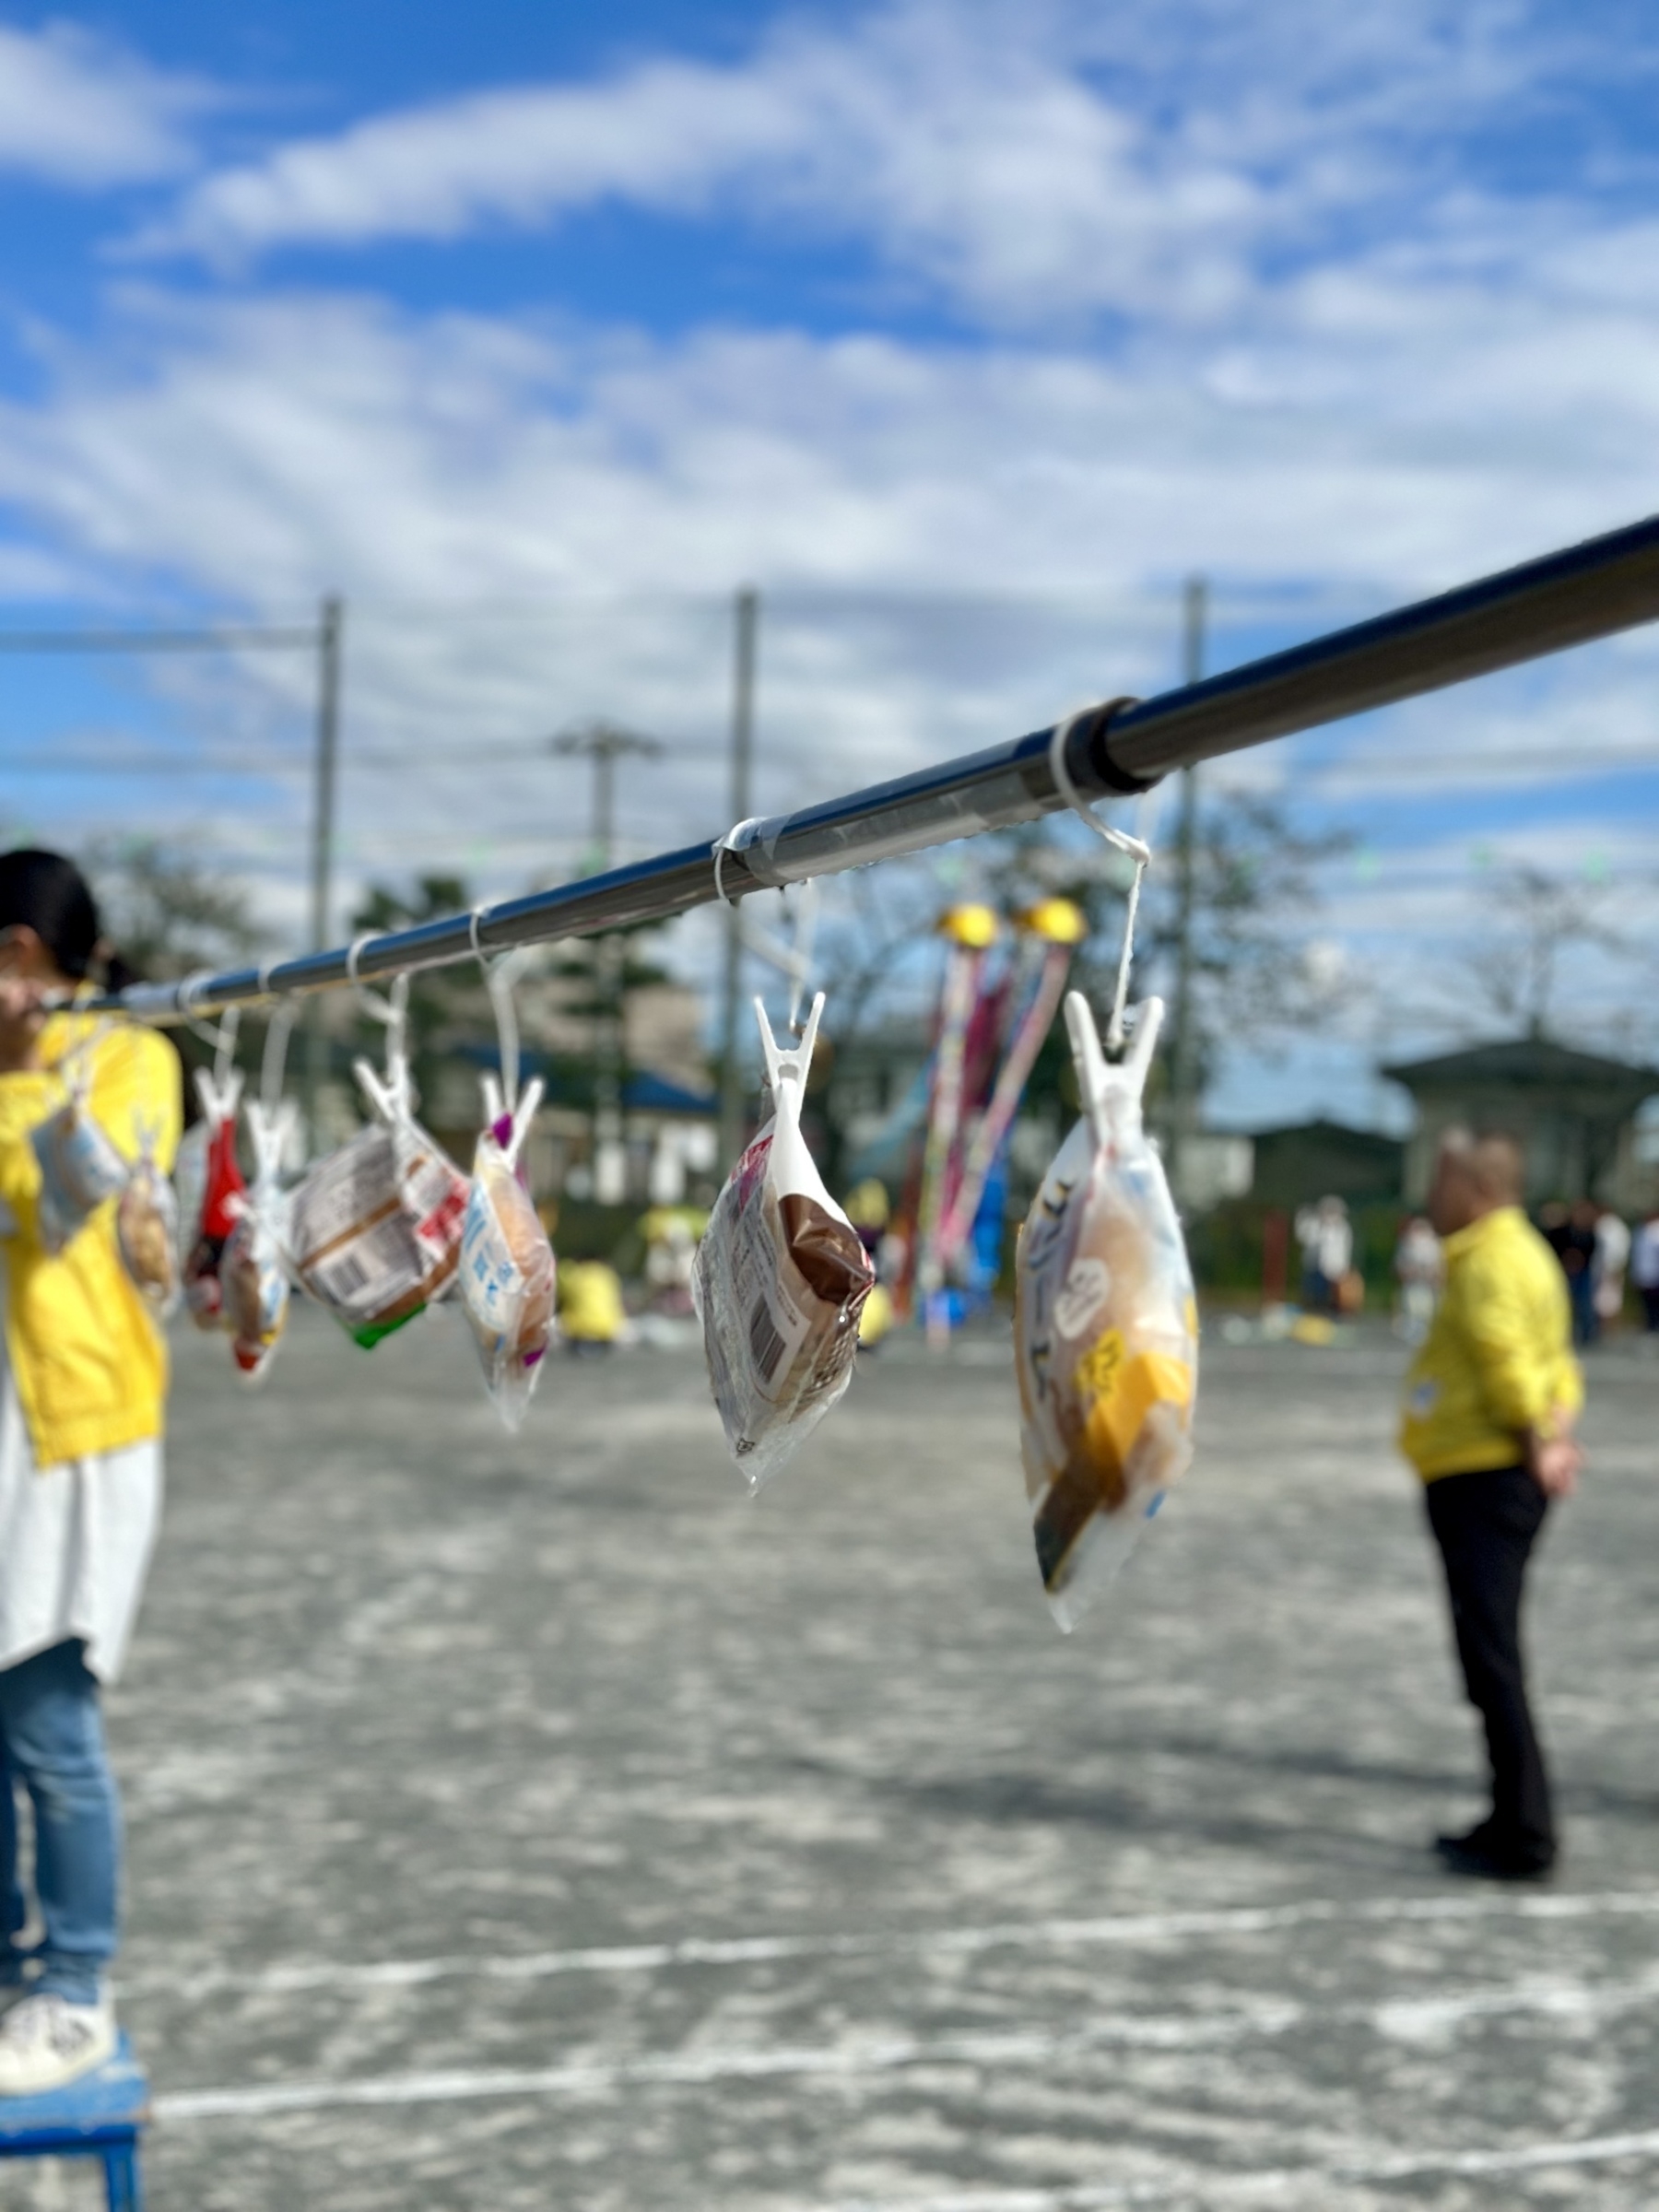 Bread packages hanging from a laundry pole. 